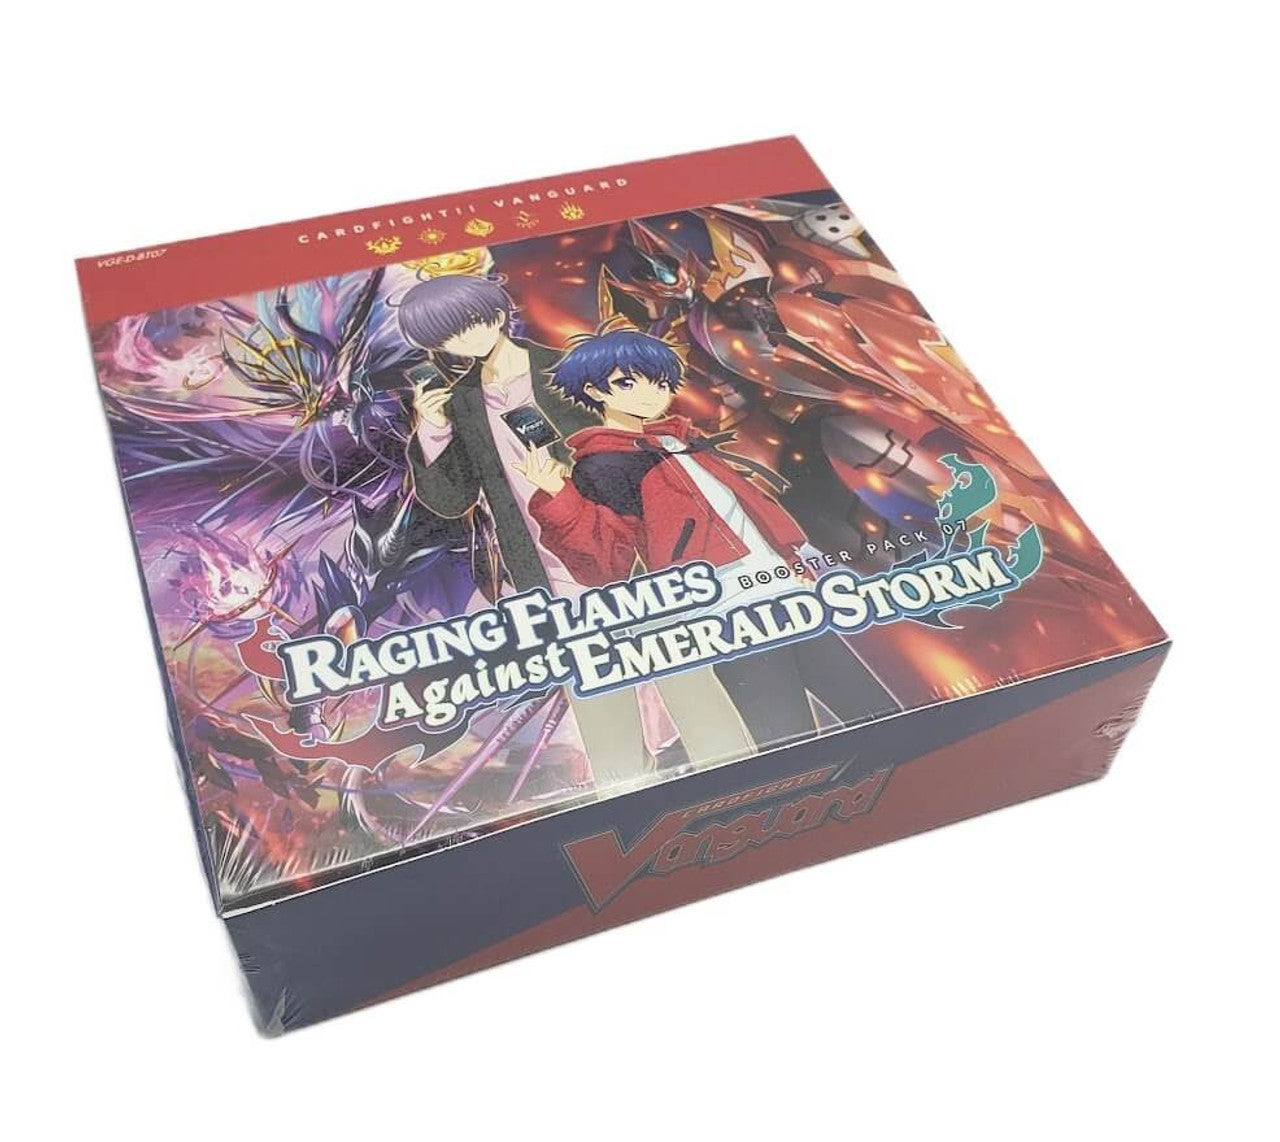 Cardfight Vanguard Raging Flames Against Emerald Storm Sealed Box